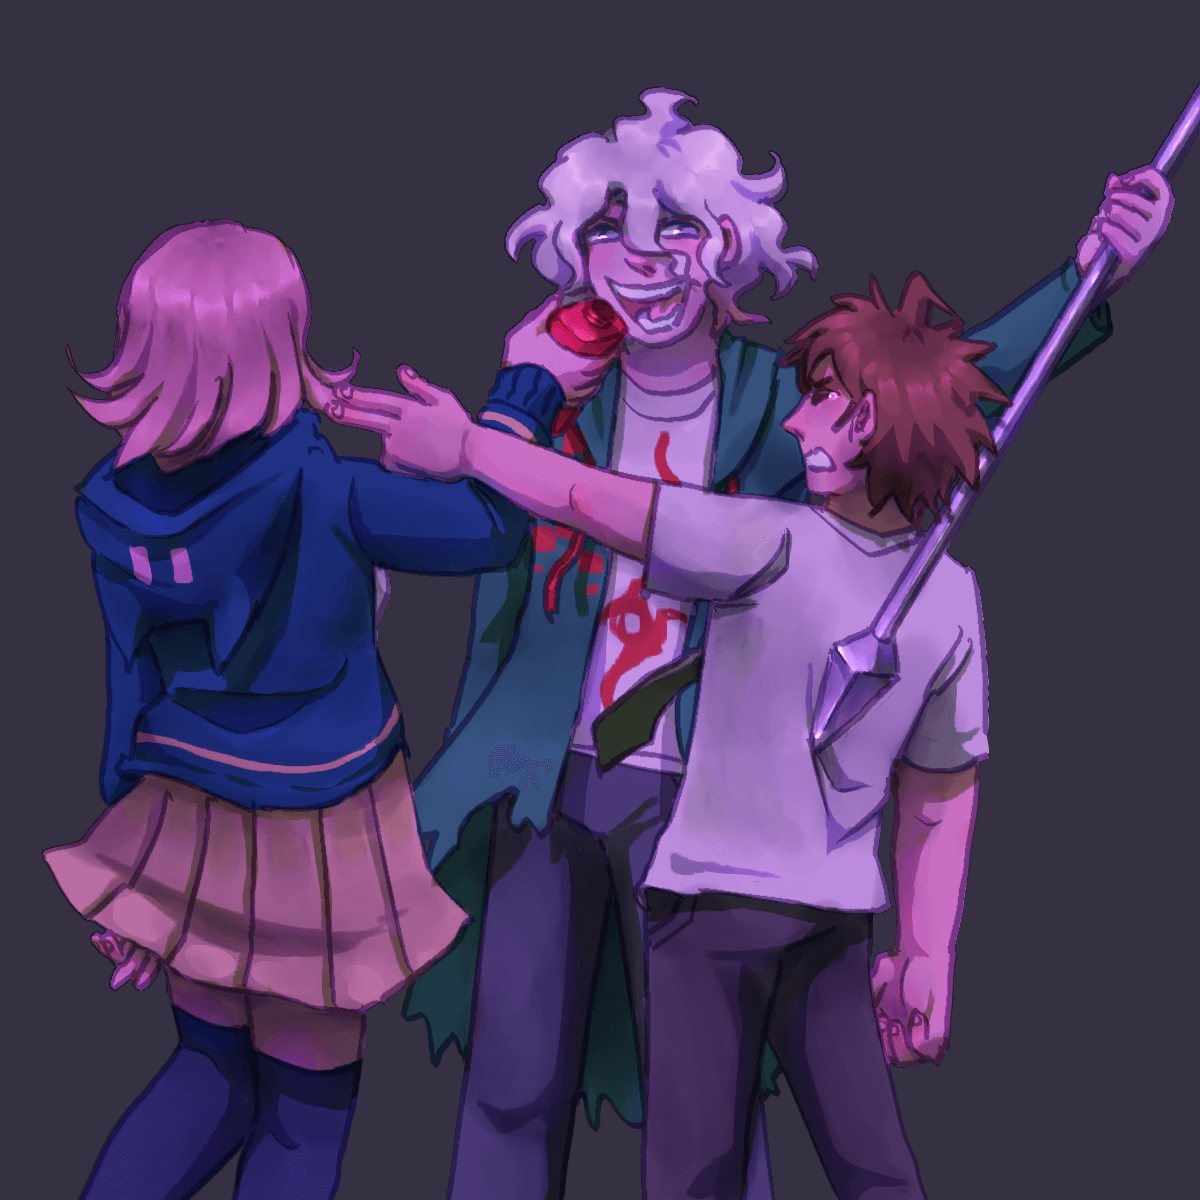 a drawing of hajime, chiaki, and nagito standing in a circle. hajime is pointing a 
		finger gun at chiaki with a pained expression, chiaki is holding the poisoned fire grenade to nagito's face, and
		nagito is pressing the spear into hajime's back.